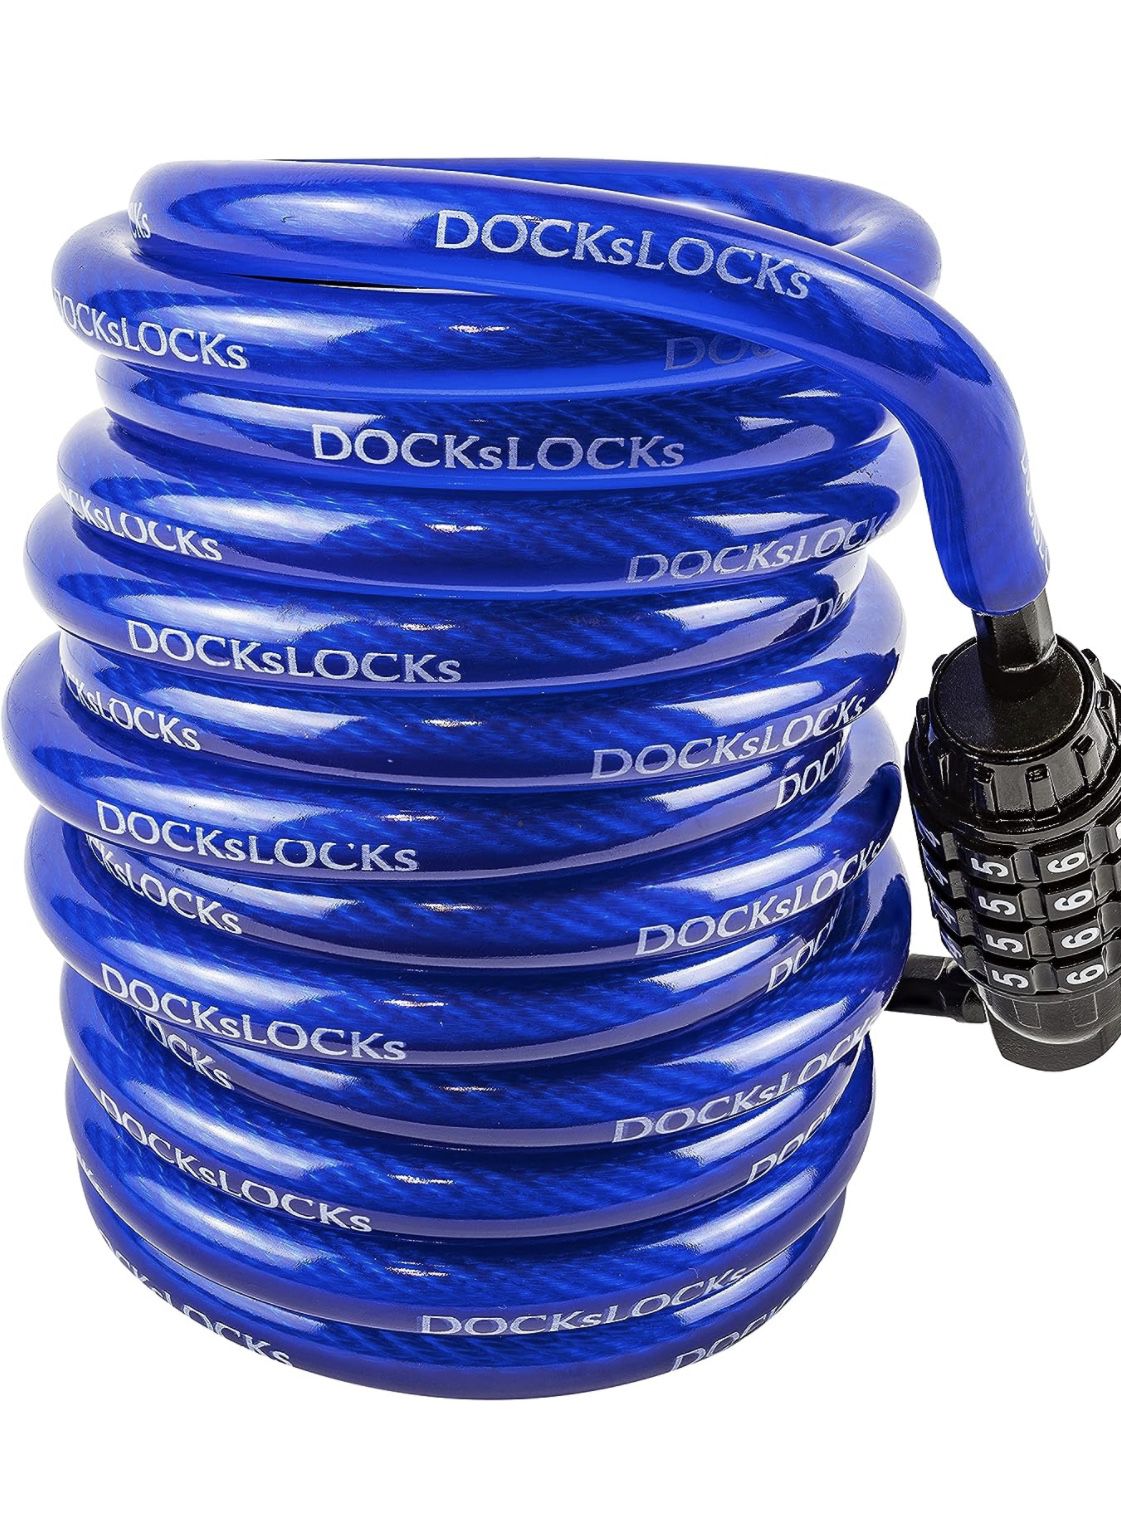 Weatherproof Security Coiled Cable Lock 10ft - Combination Lock